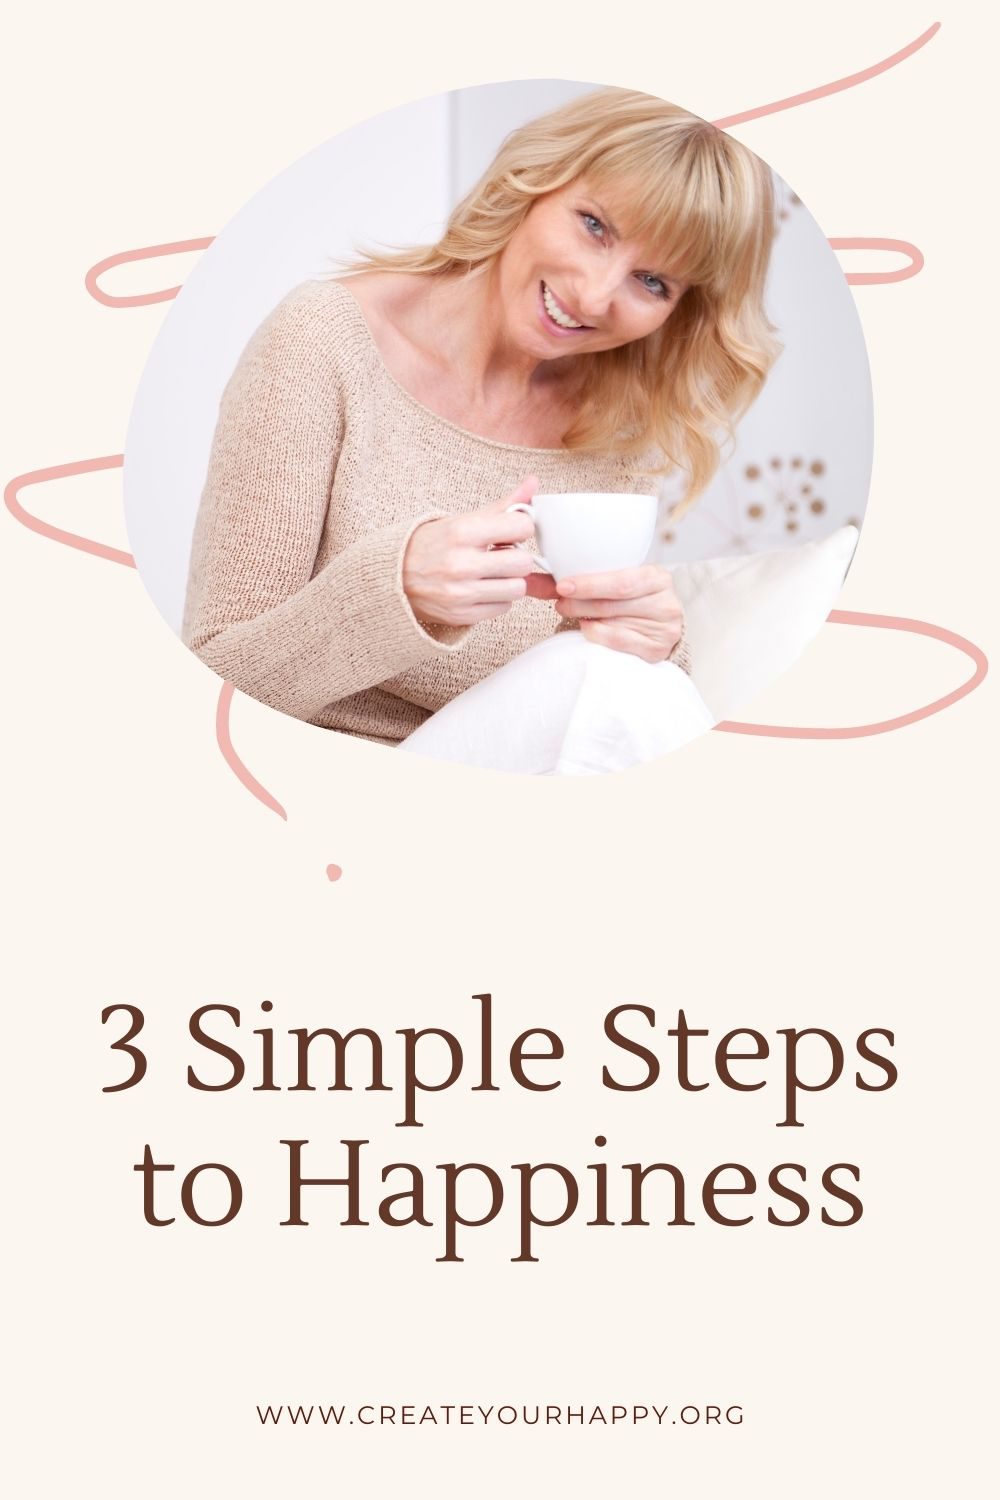 3 Simple Steps to Happiness